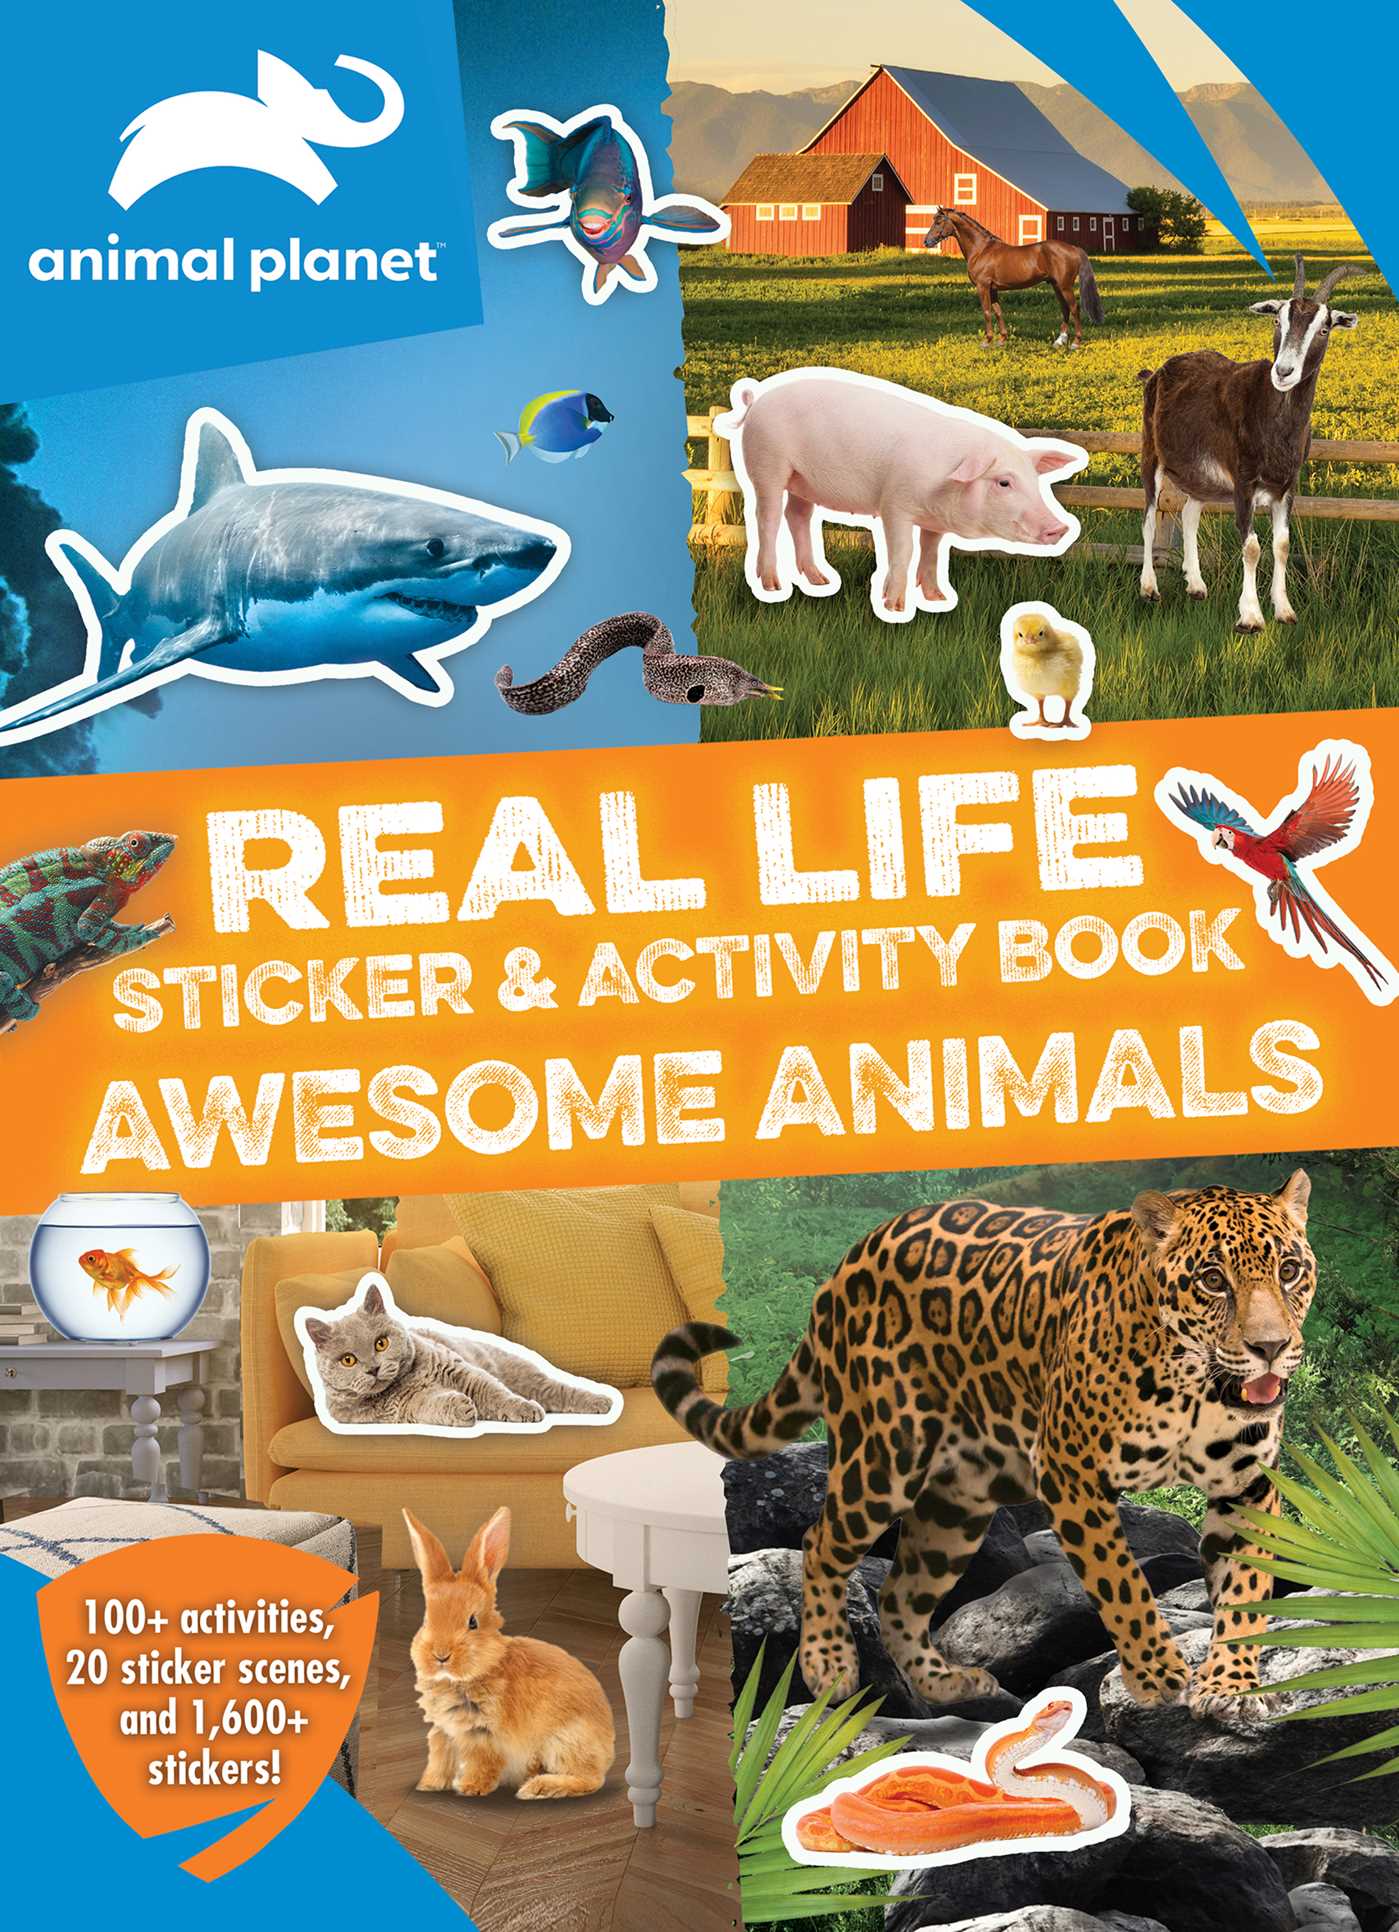 Animal Planet: Real Life Sticker and Activity Book: Awesome Animals | 